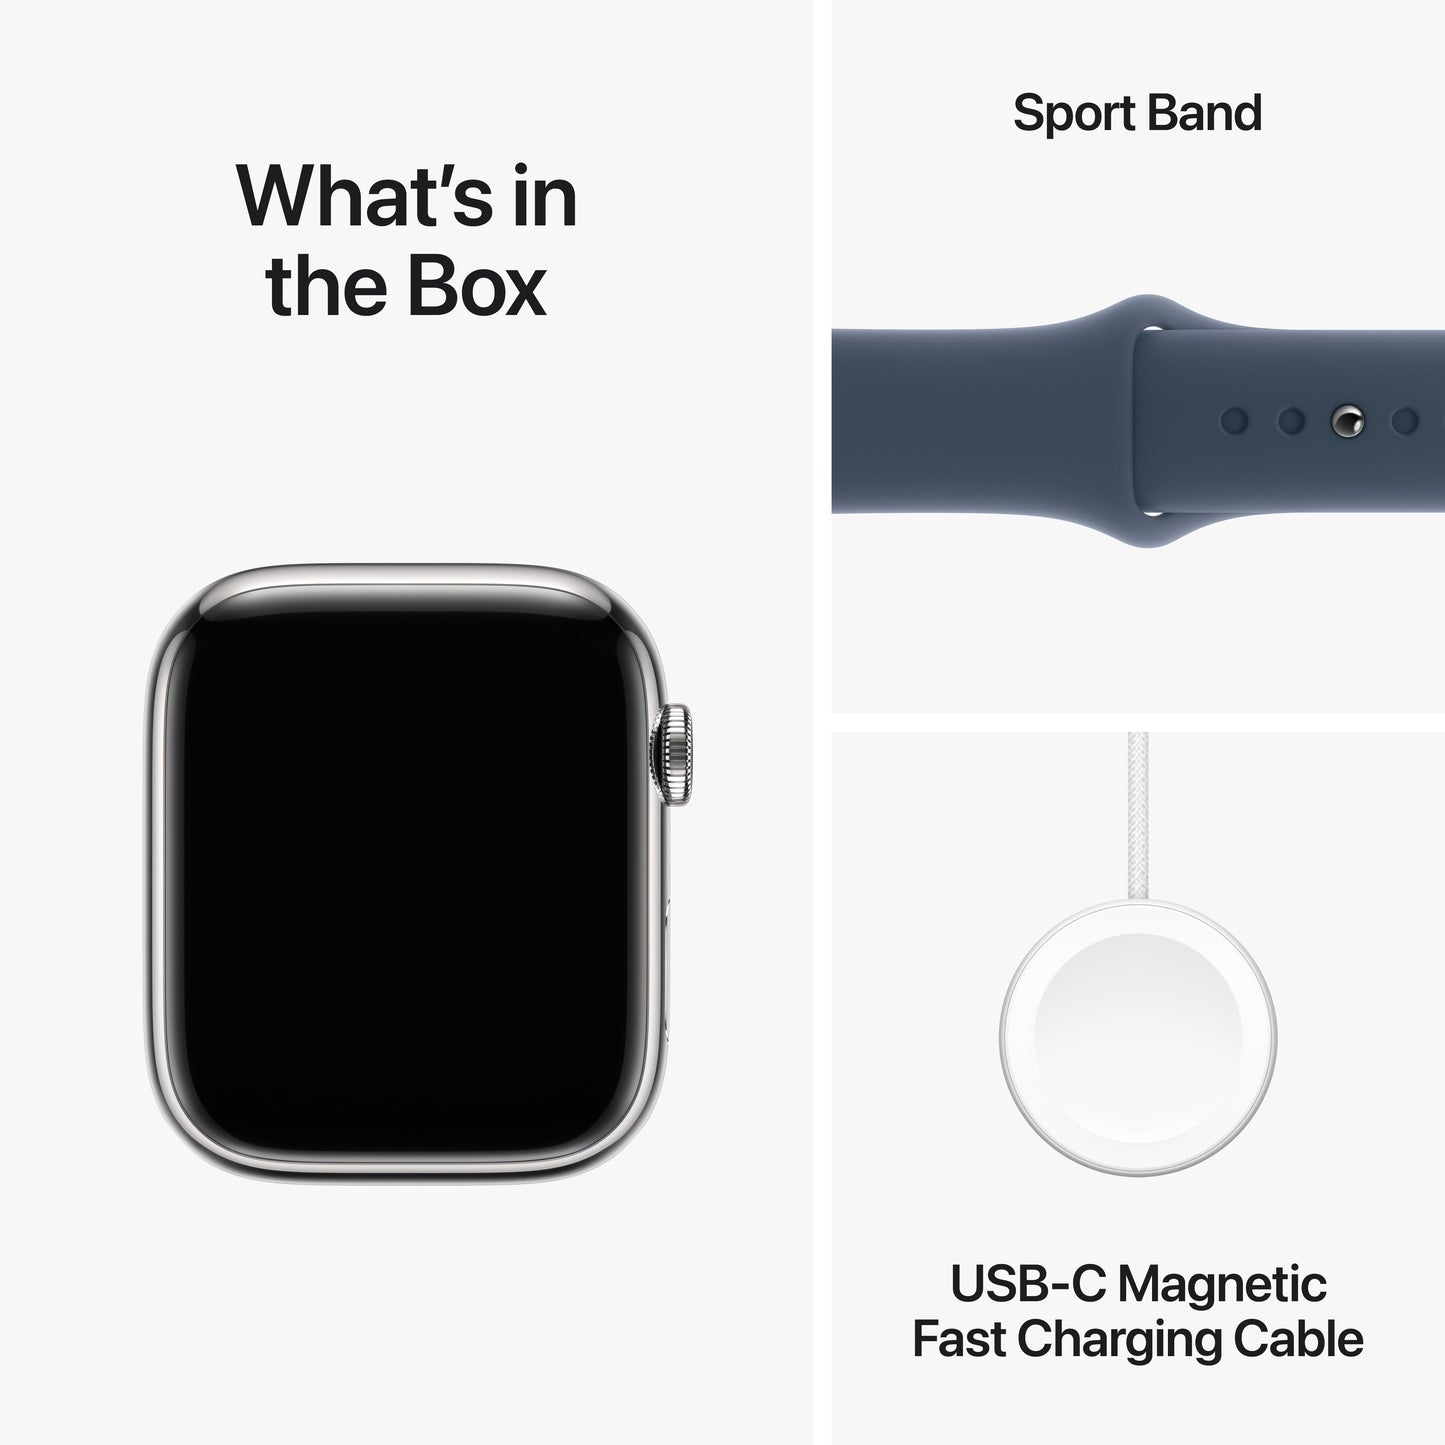 Apple Watch Series 9 GPS + Cellular 45mm Silver Stainless Steel Case with Storm Blue Sport Band - S/M